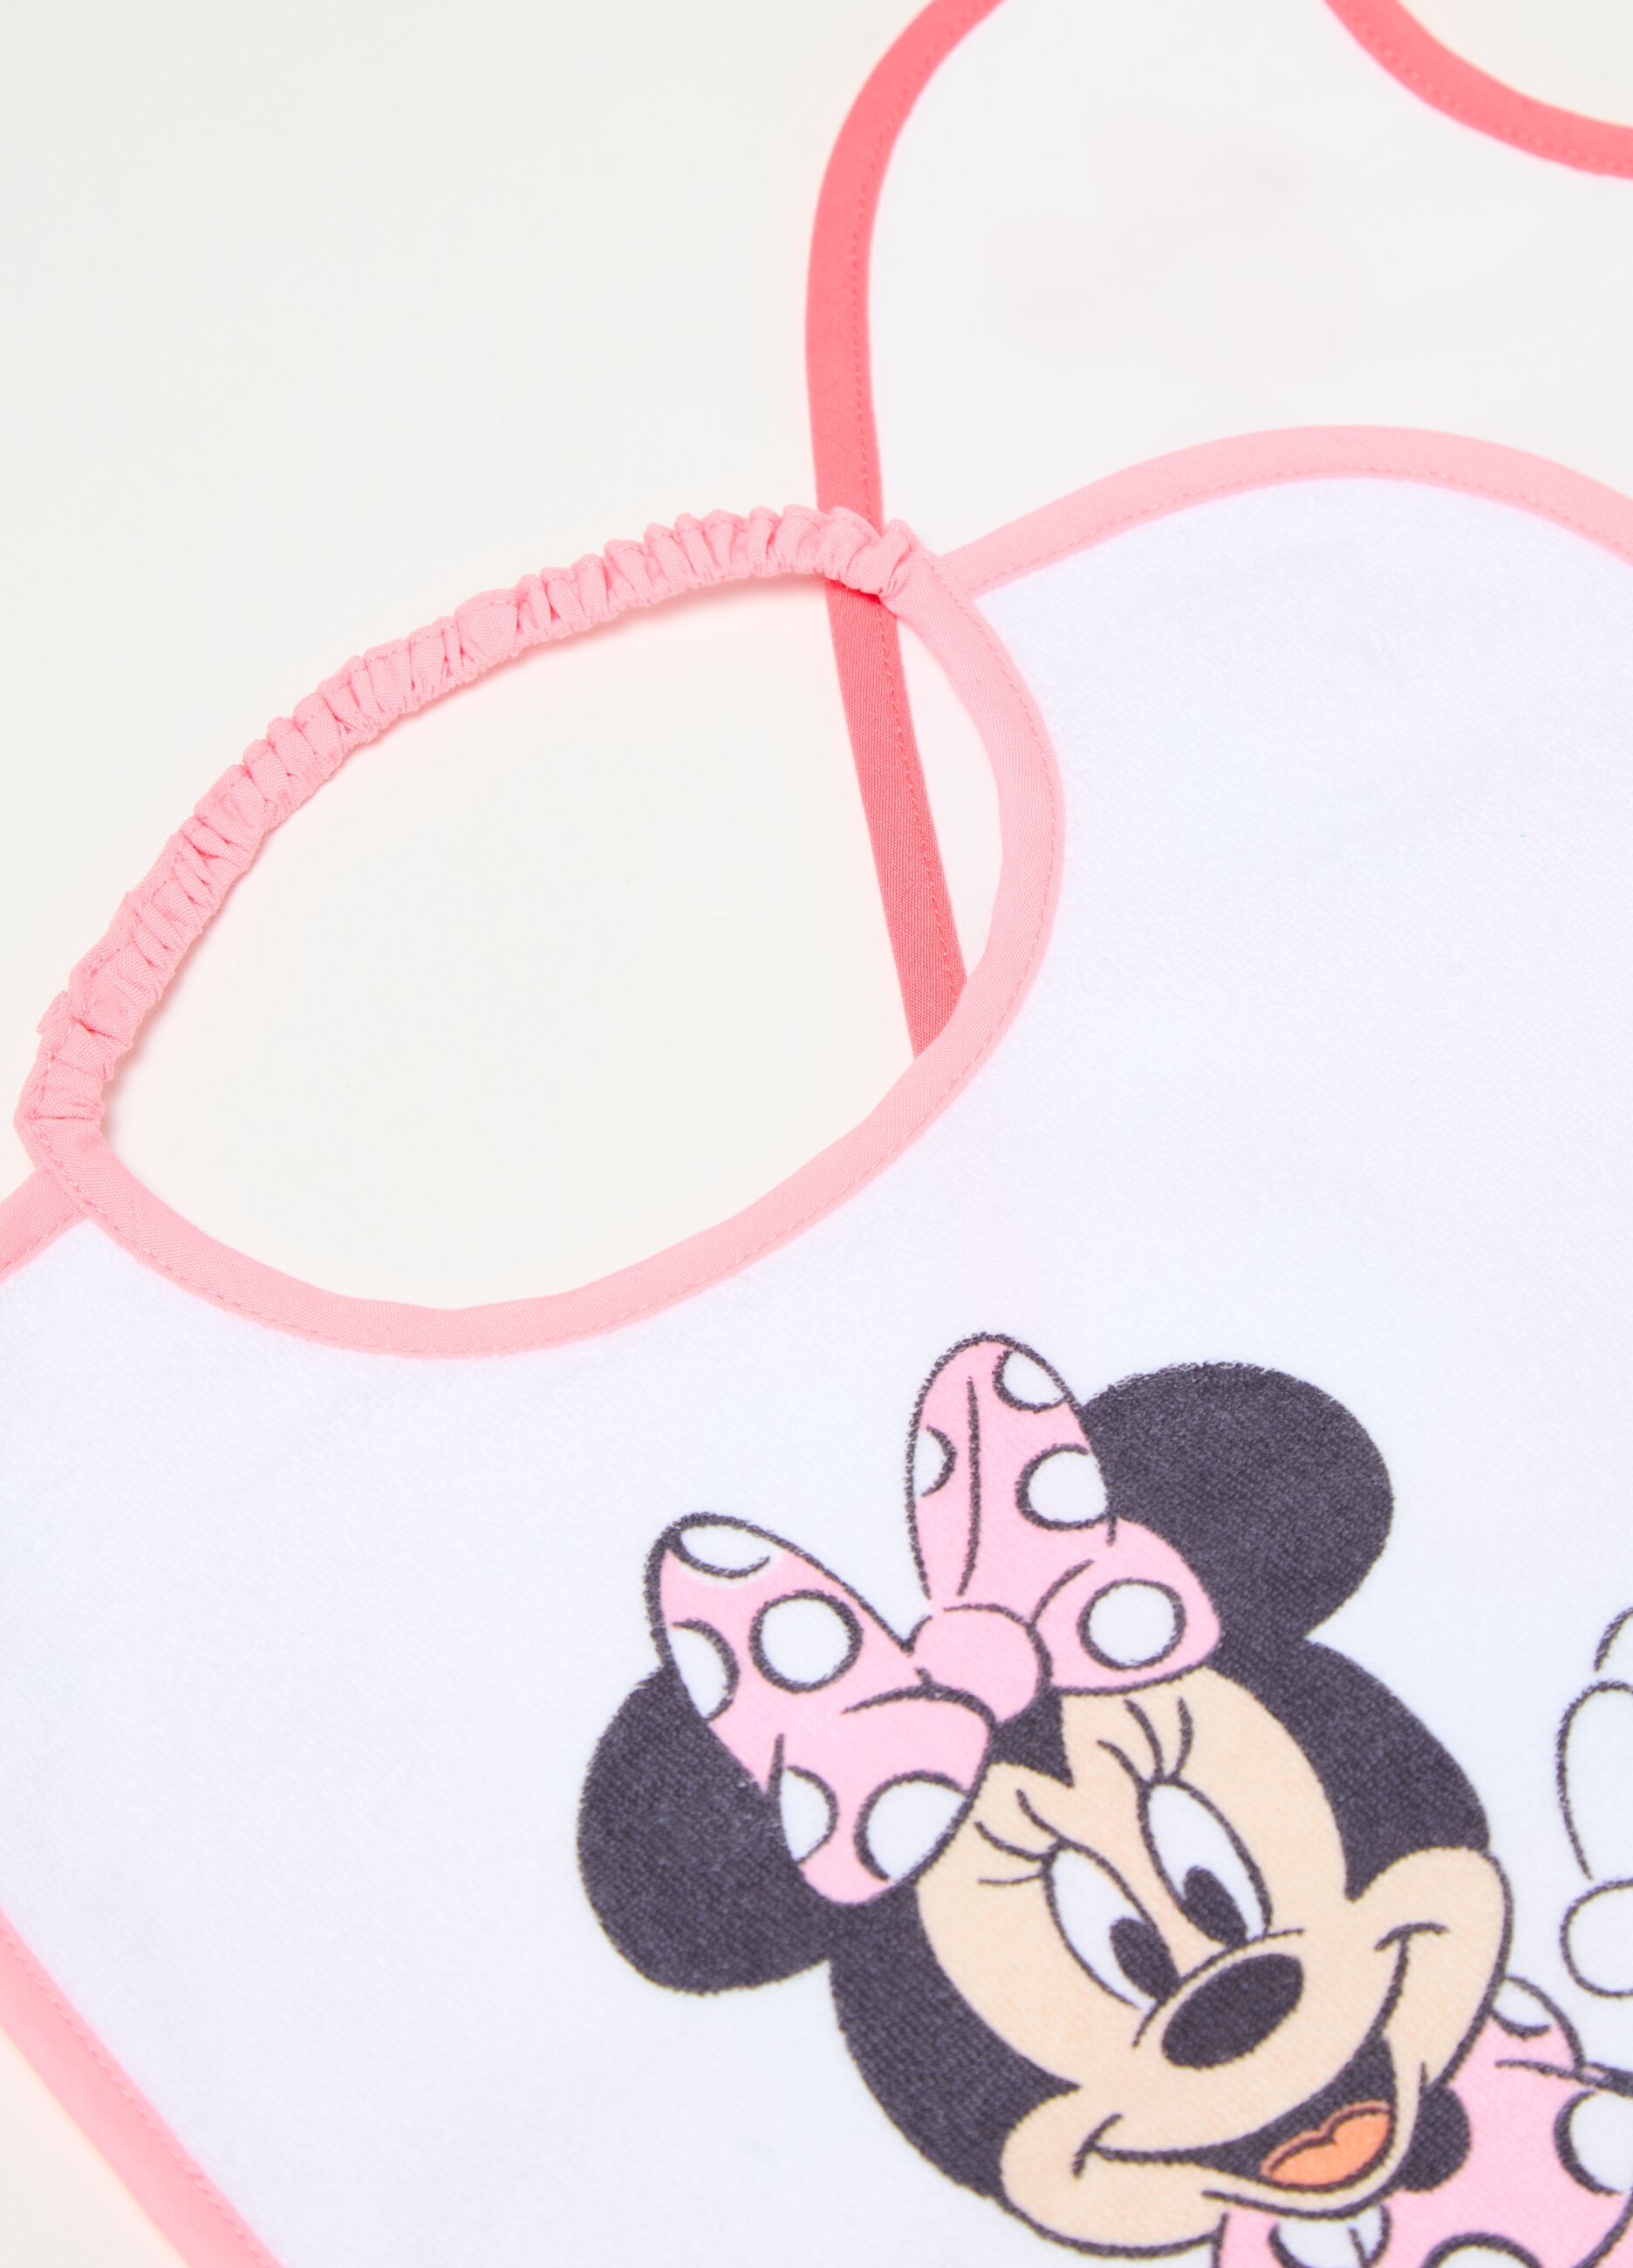 Two-pack bibs with PEVA backing and Minnie Mouse print